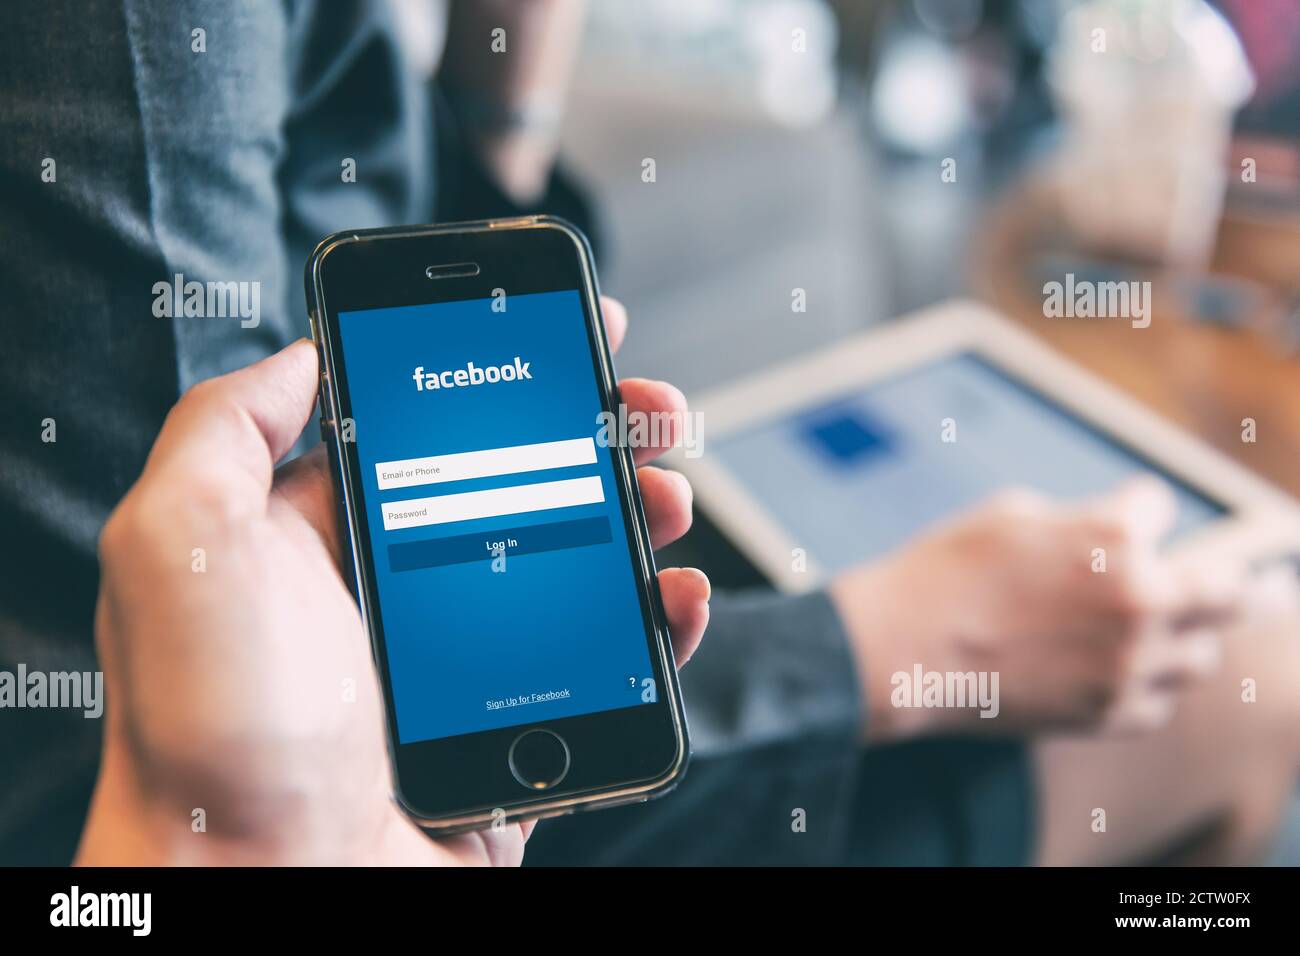 Facebook App login page on iPhone with people using tablet background for social network security on mobile smartphone.,20 July 2019,Bangkok, THAILAND Stock Photo